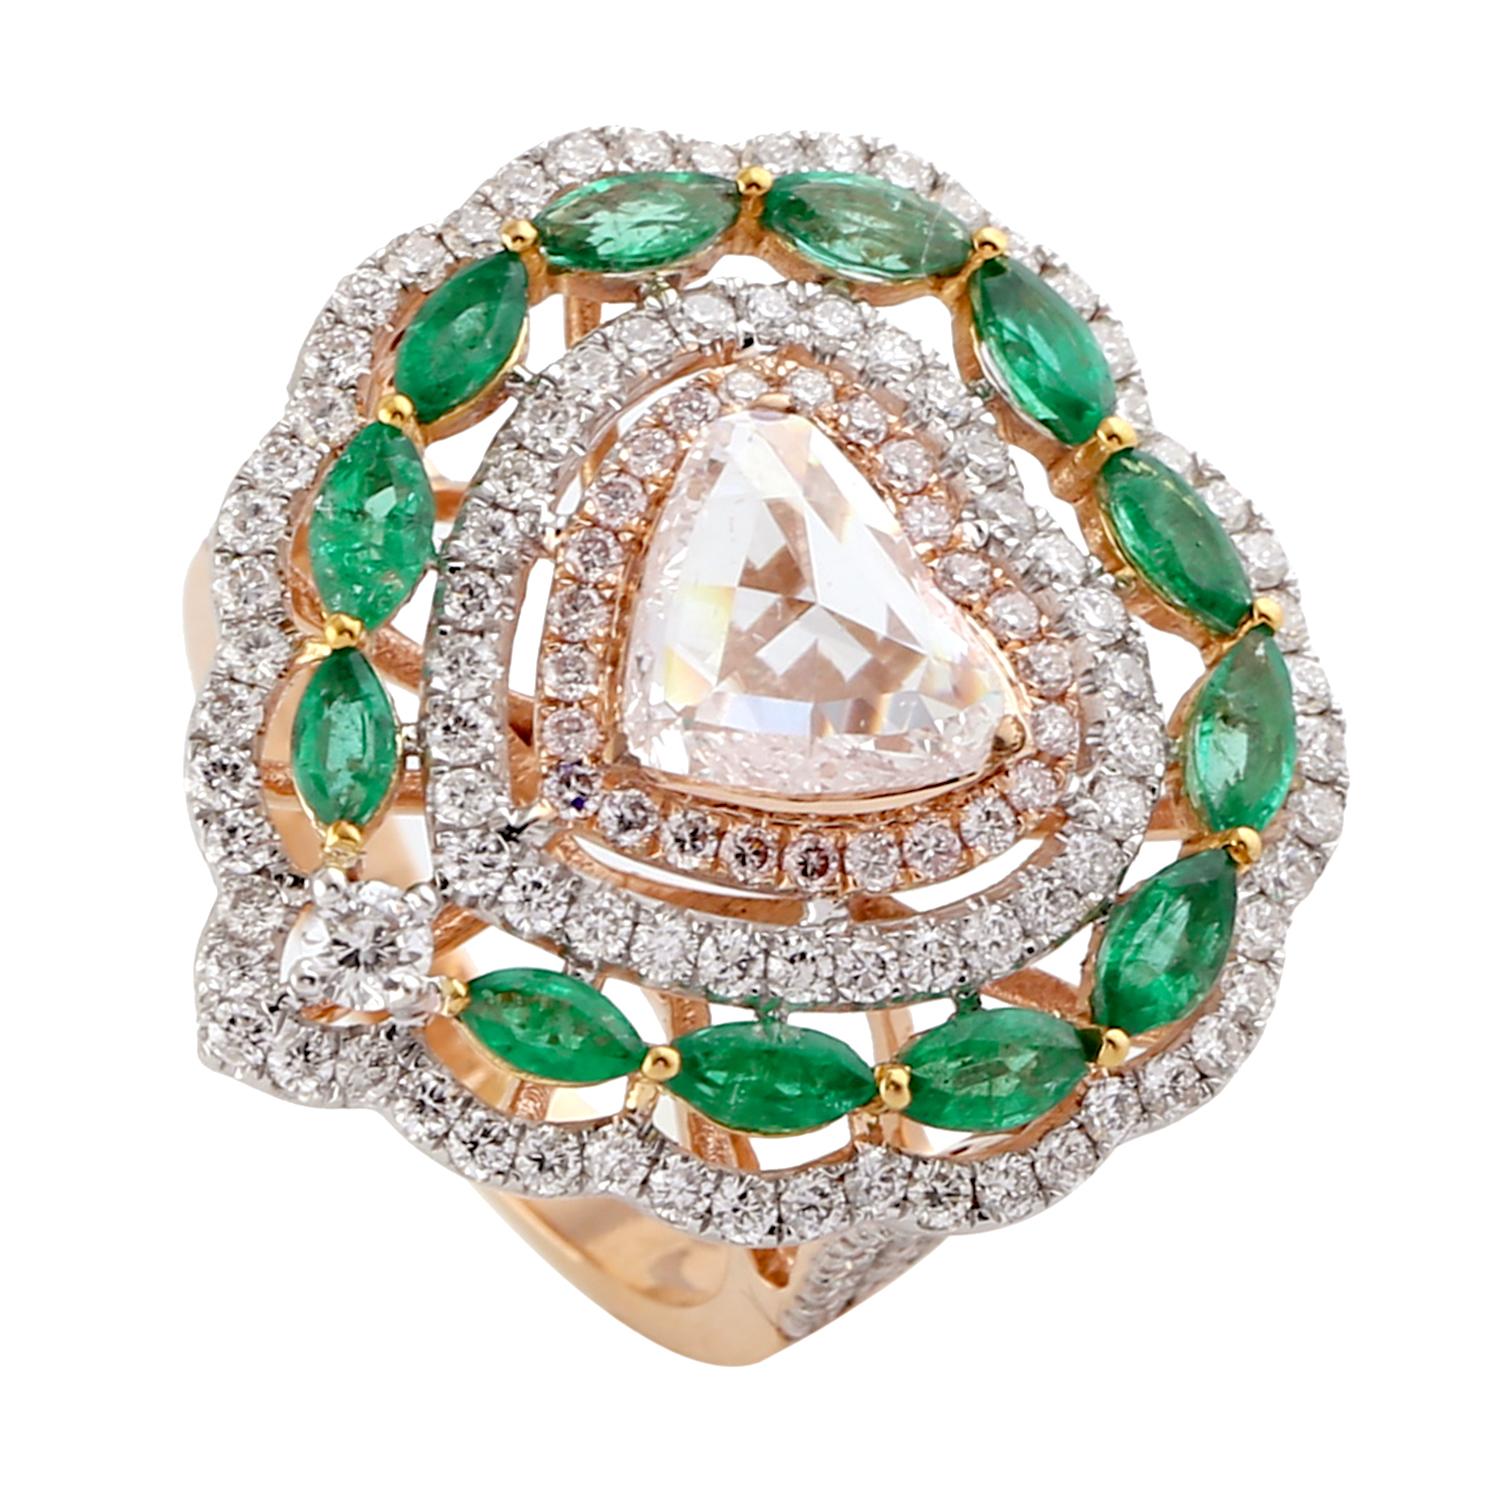 This ring has been meticulously crafted from 14-karat gold.  It is hand set with 1.53 carat emerald & 2.43 carats of sparkling diamonds. 

The ring is a size 6.5 and may be resized to larger or smaller upon request. 
FOLLOW  MEGHNA JEWELS storefront